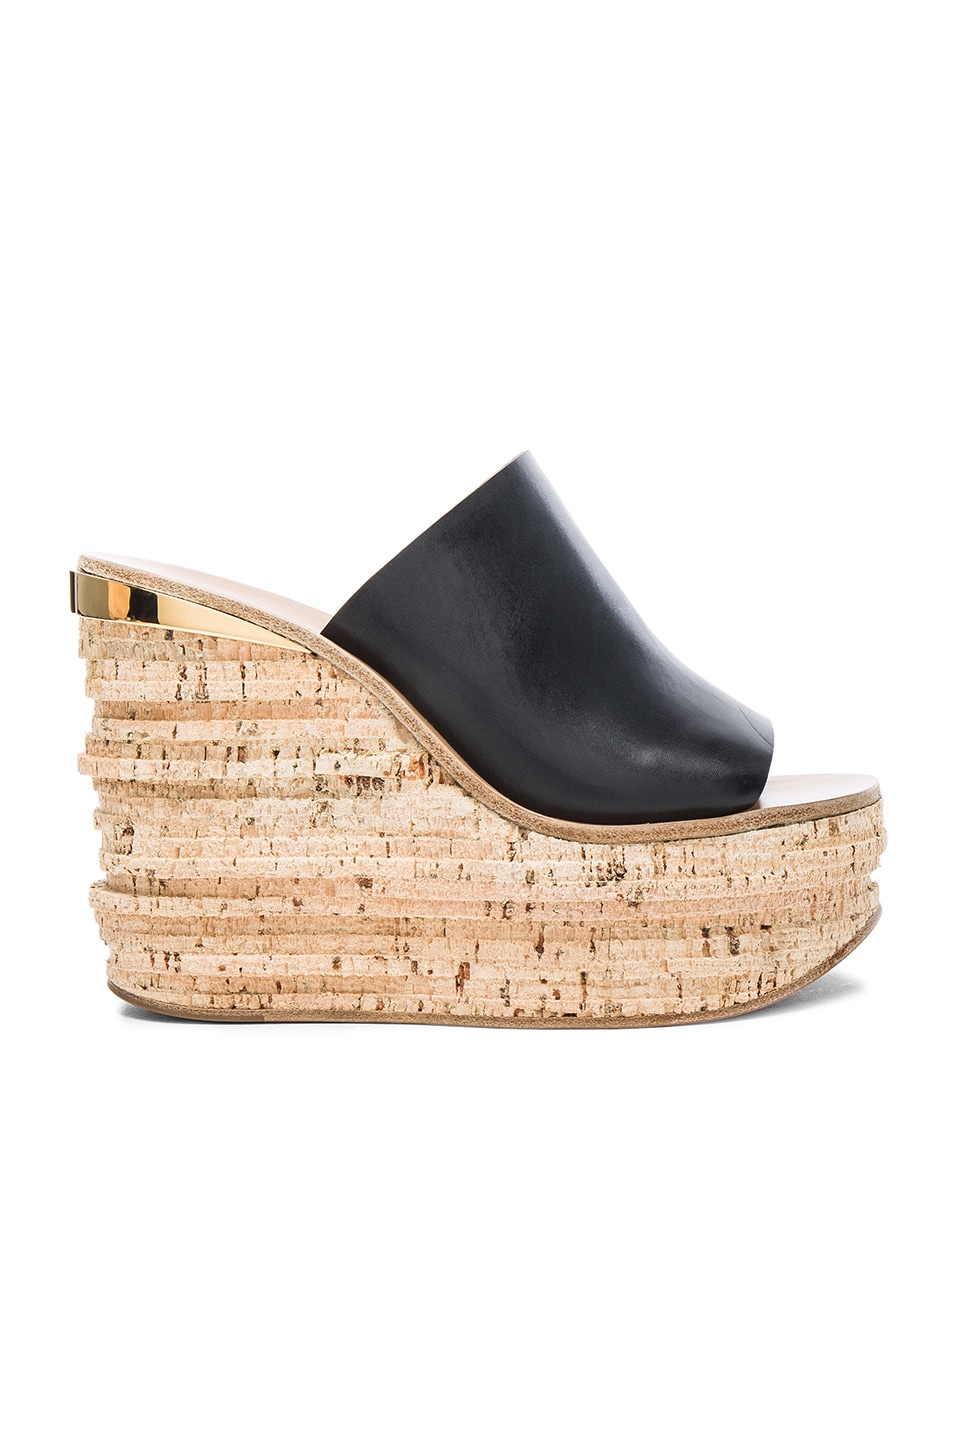 Image 1 of Chloe Camille Leather Wedge Sandals in Black